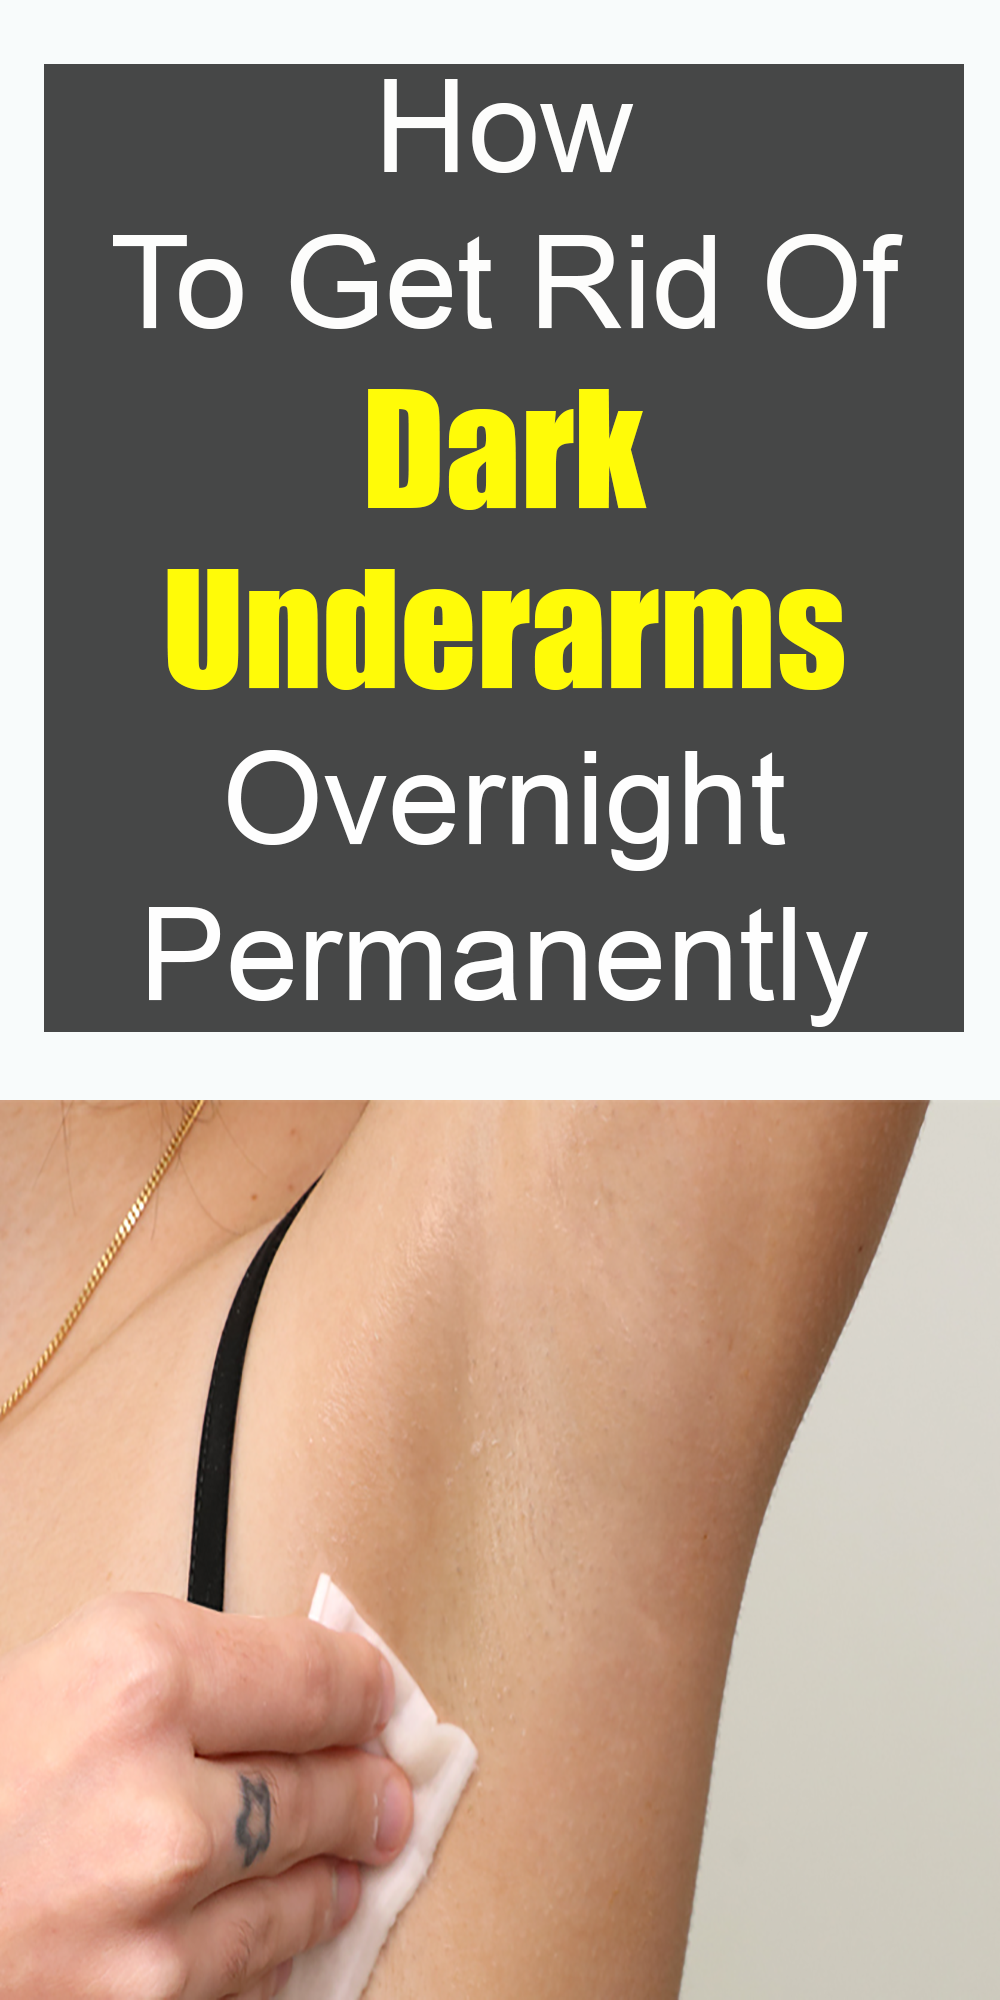 Horms Overnight Permanentlyw To Get Rid Of Dark Undera -   15 how to get rid of dark underarms ideas